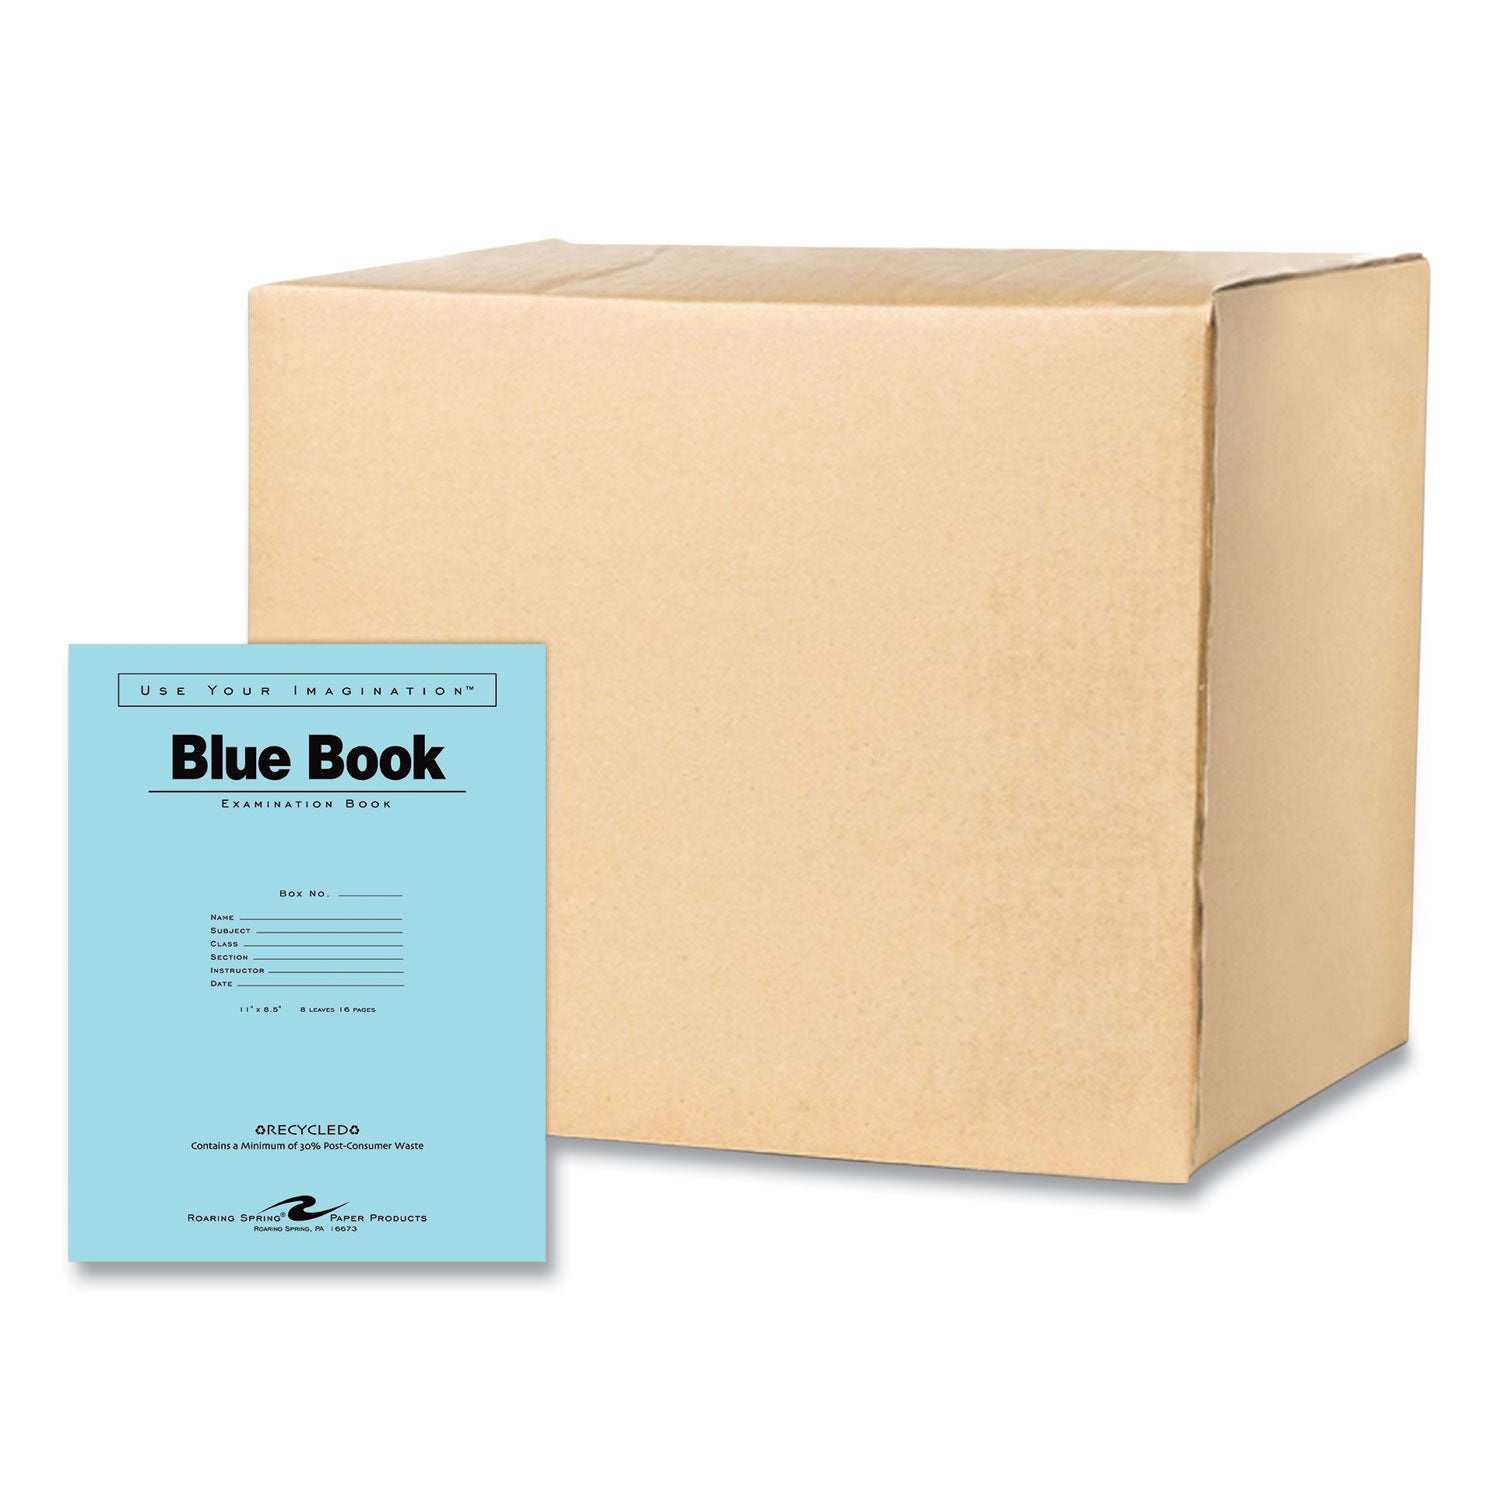 recycled-exam-book-wide-legal-rule-blue-cover-8-11-x-85-sheets-500-carton-ships-in-4-6-business-days_roa77609cs - 1